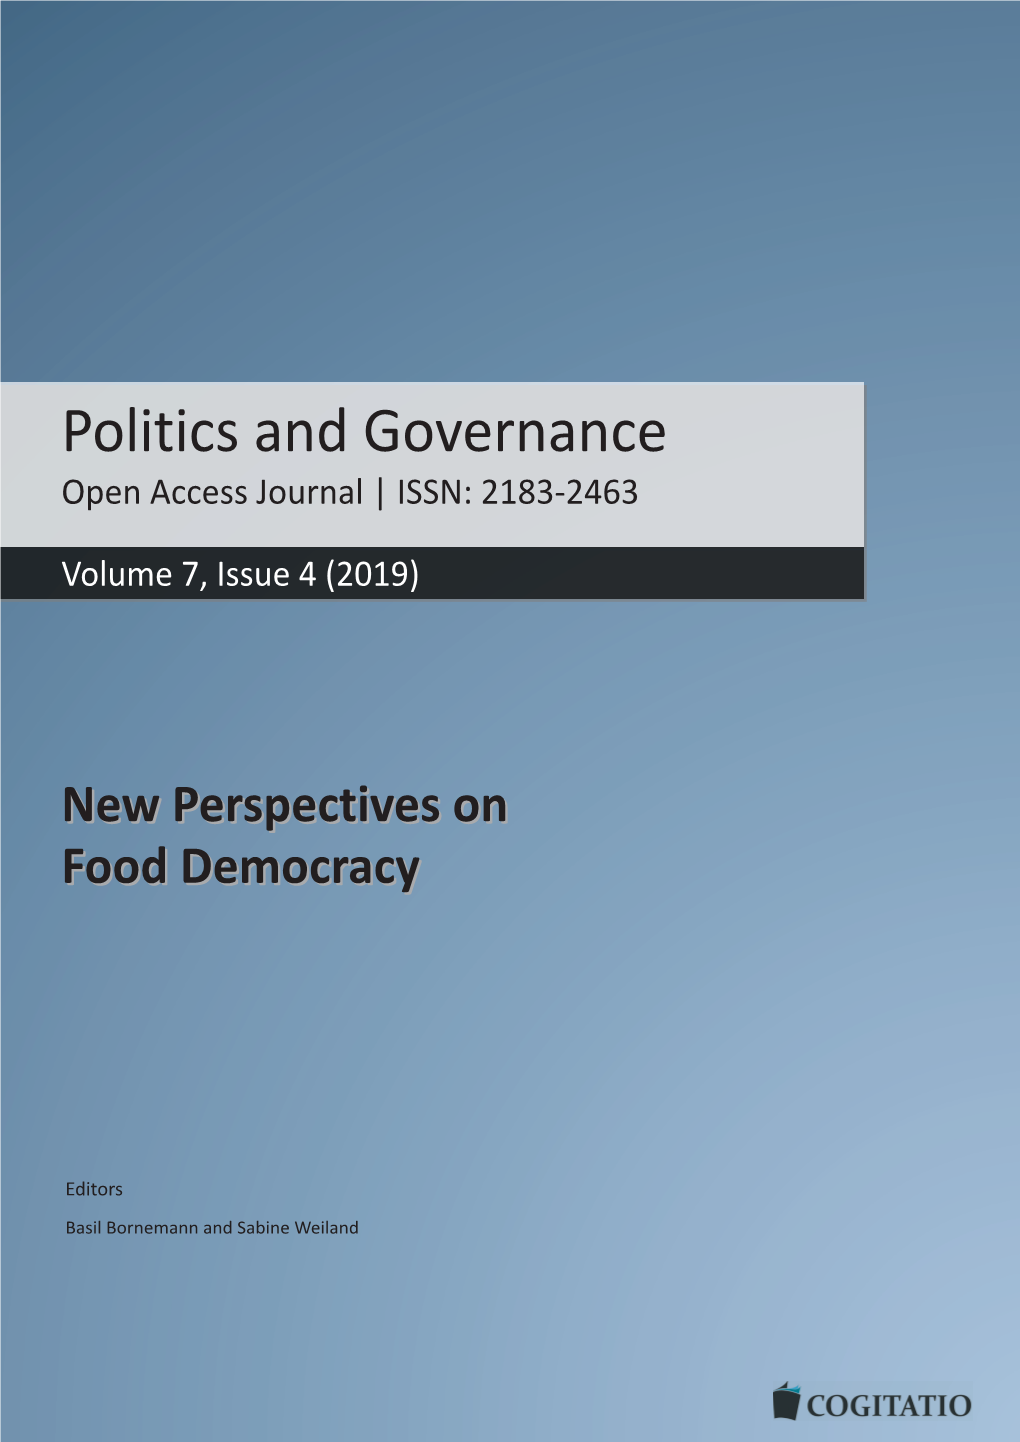 Food Democracy for All? Developing a Food Hub in the Context of Socio-Economic Deprivation Sebastian Prost 142–153